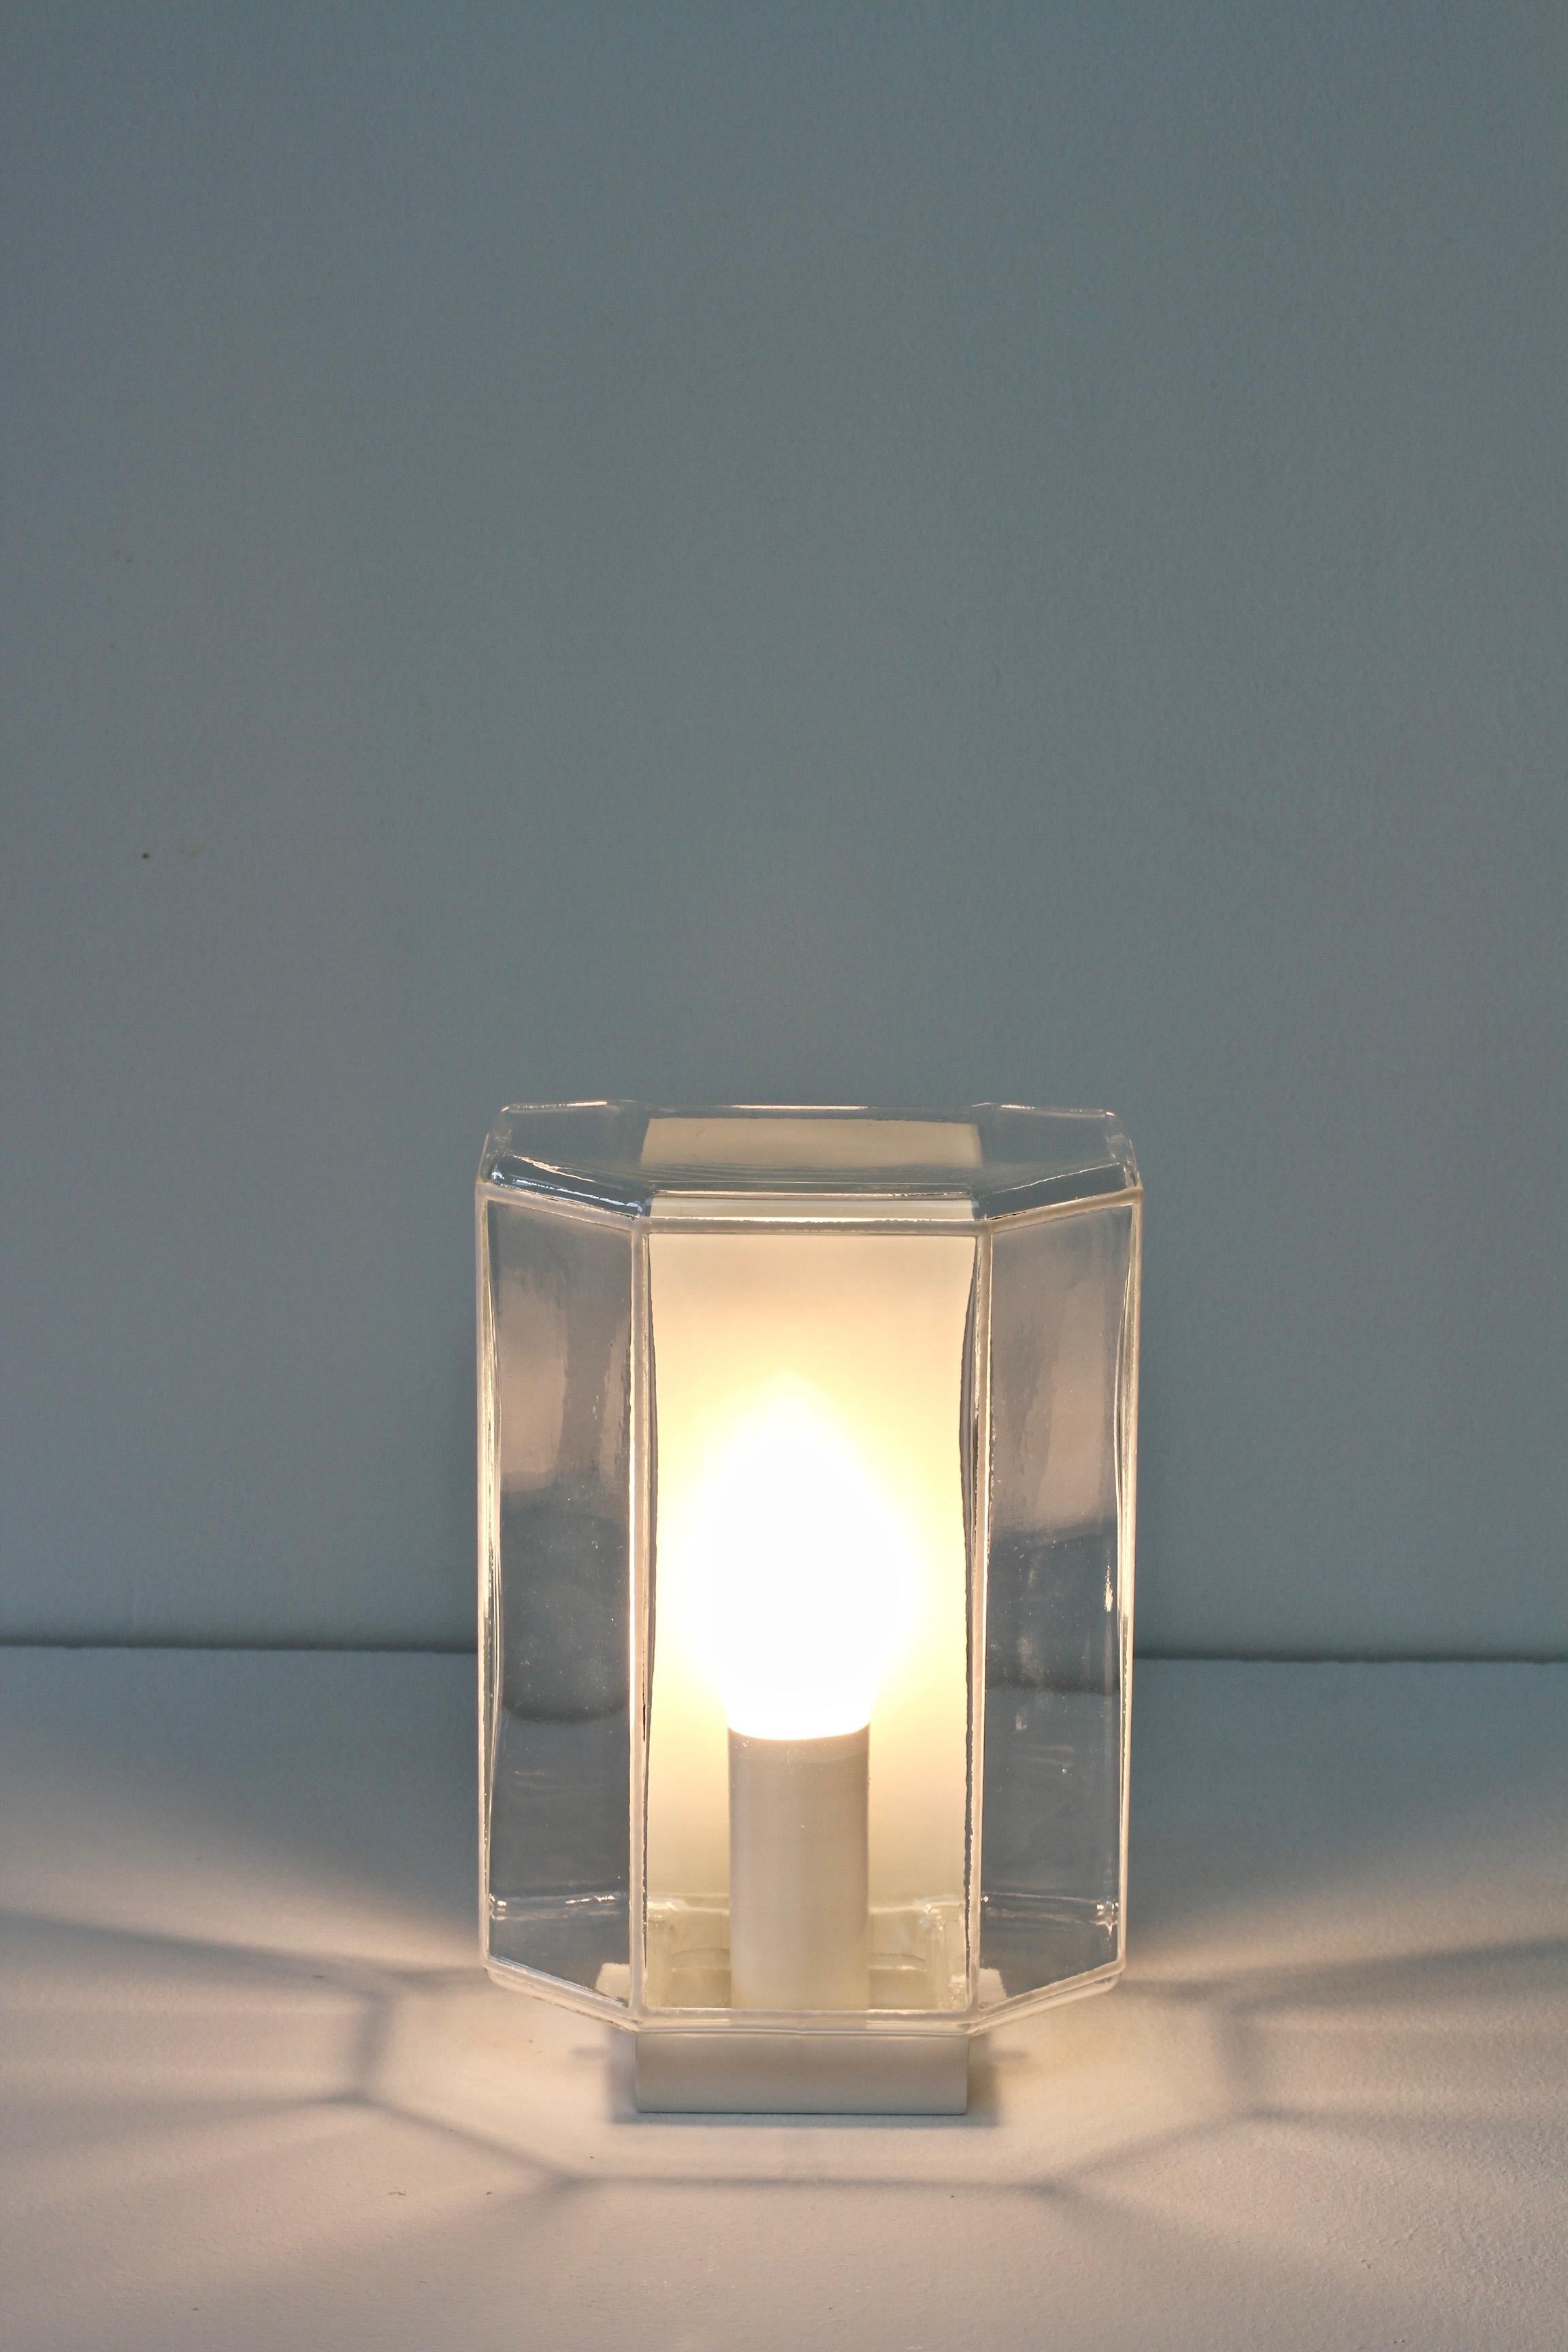 1 of 3 1970s Minimalist White and Clear Glass Wall Lights by Glashütte Limburg  2